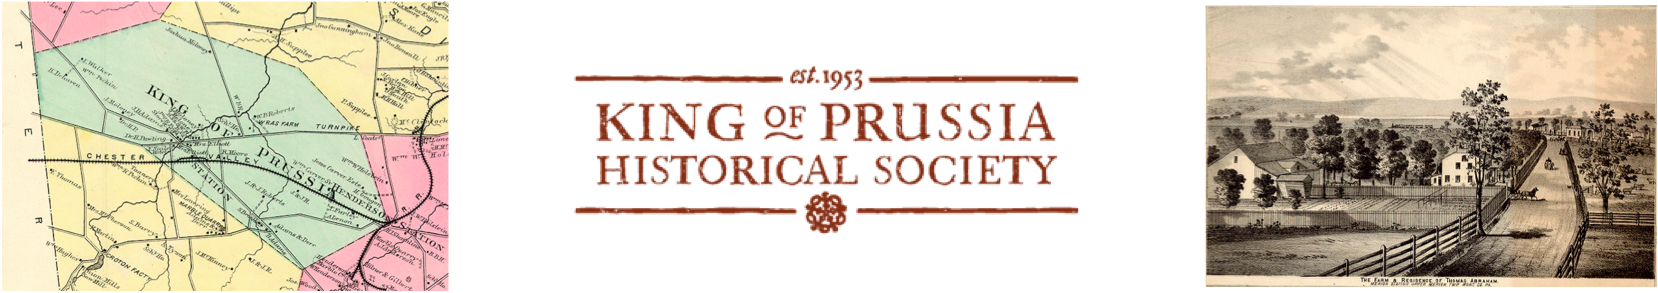 King of Prussia Historical Society